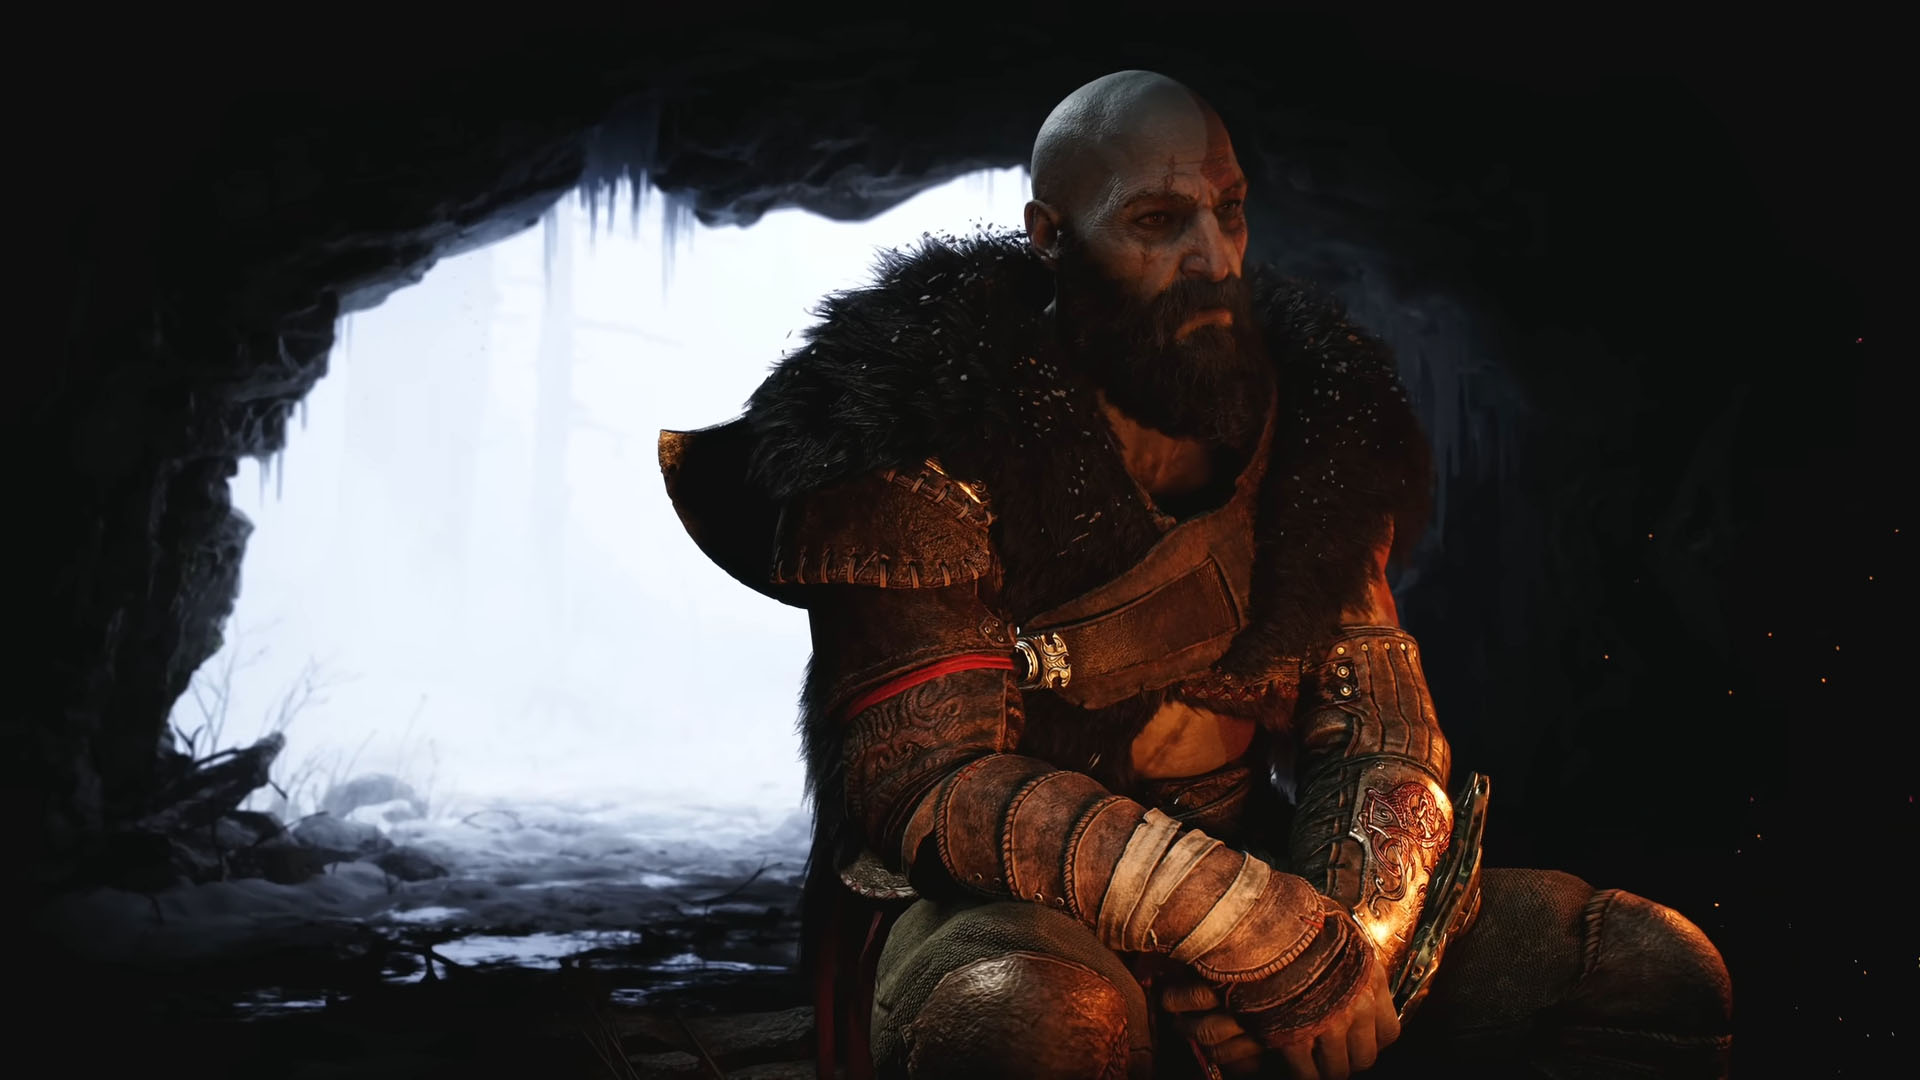 God of War Ragnarok Sales Surpass 5.1 Million Worldwide; Fastest-Selling  First Party Launch Game in PlayStation History